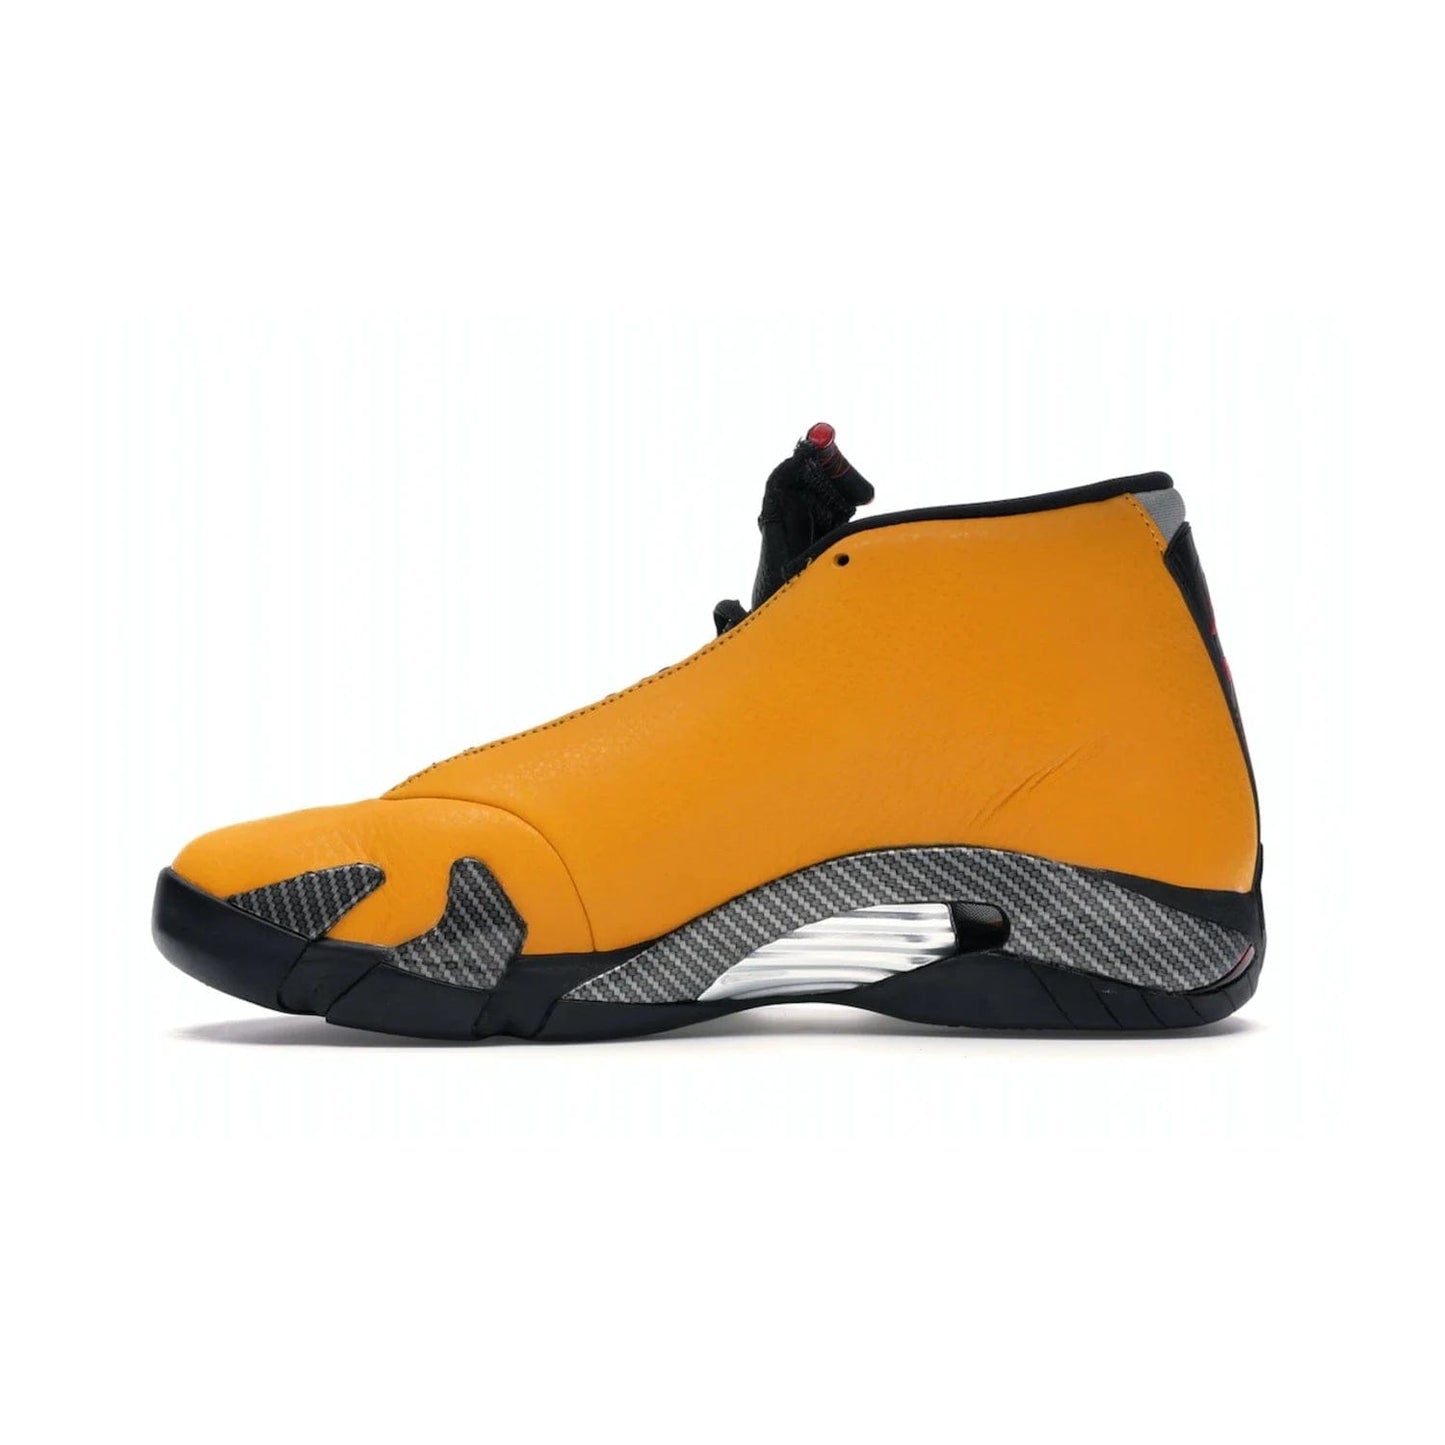 Jordan 14 Retro University Gold - Image 19 - Only at www.BallersClubKickz.com - Air Jordan 14 Retro University Gold: High-quality leather sneaker with Jumpman, tongue & heel logos. Zoom Air units & herringbone traction for superior comfort. University Gold outsole for stylish streetwear.